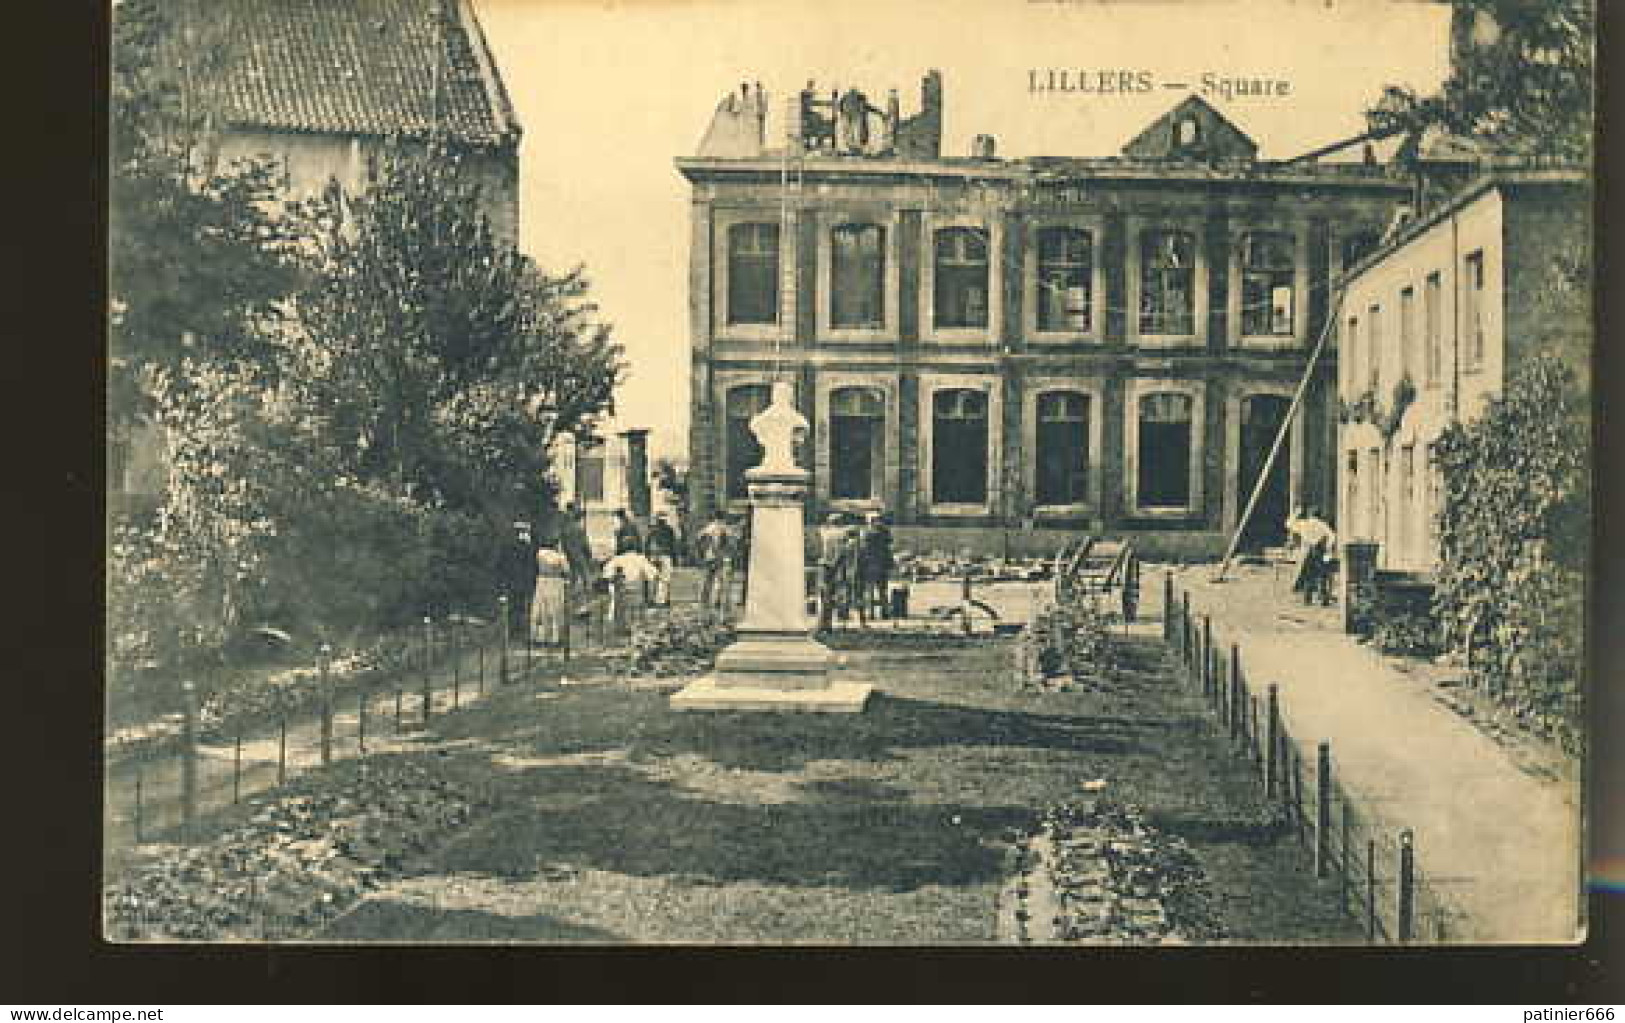 Lillers Square - Lillers